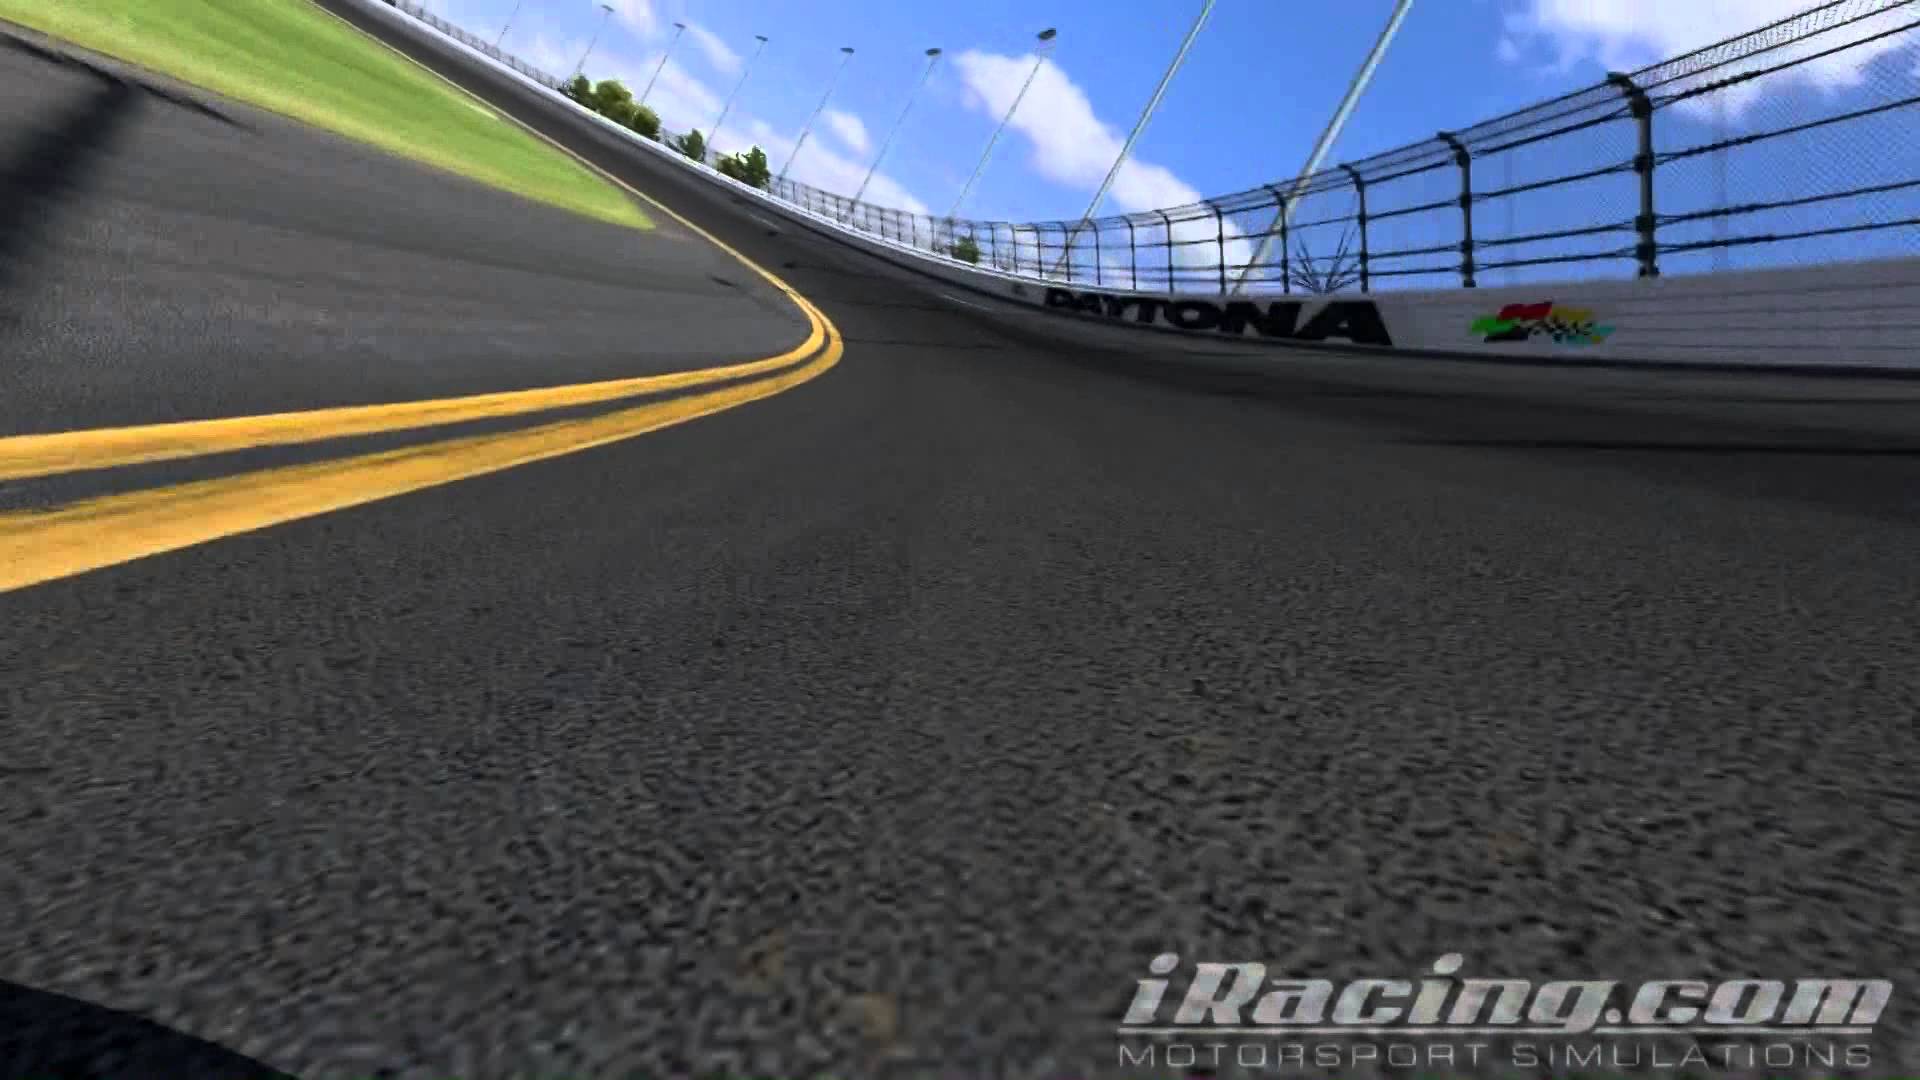 Gallery For Gt Racing Track Background